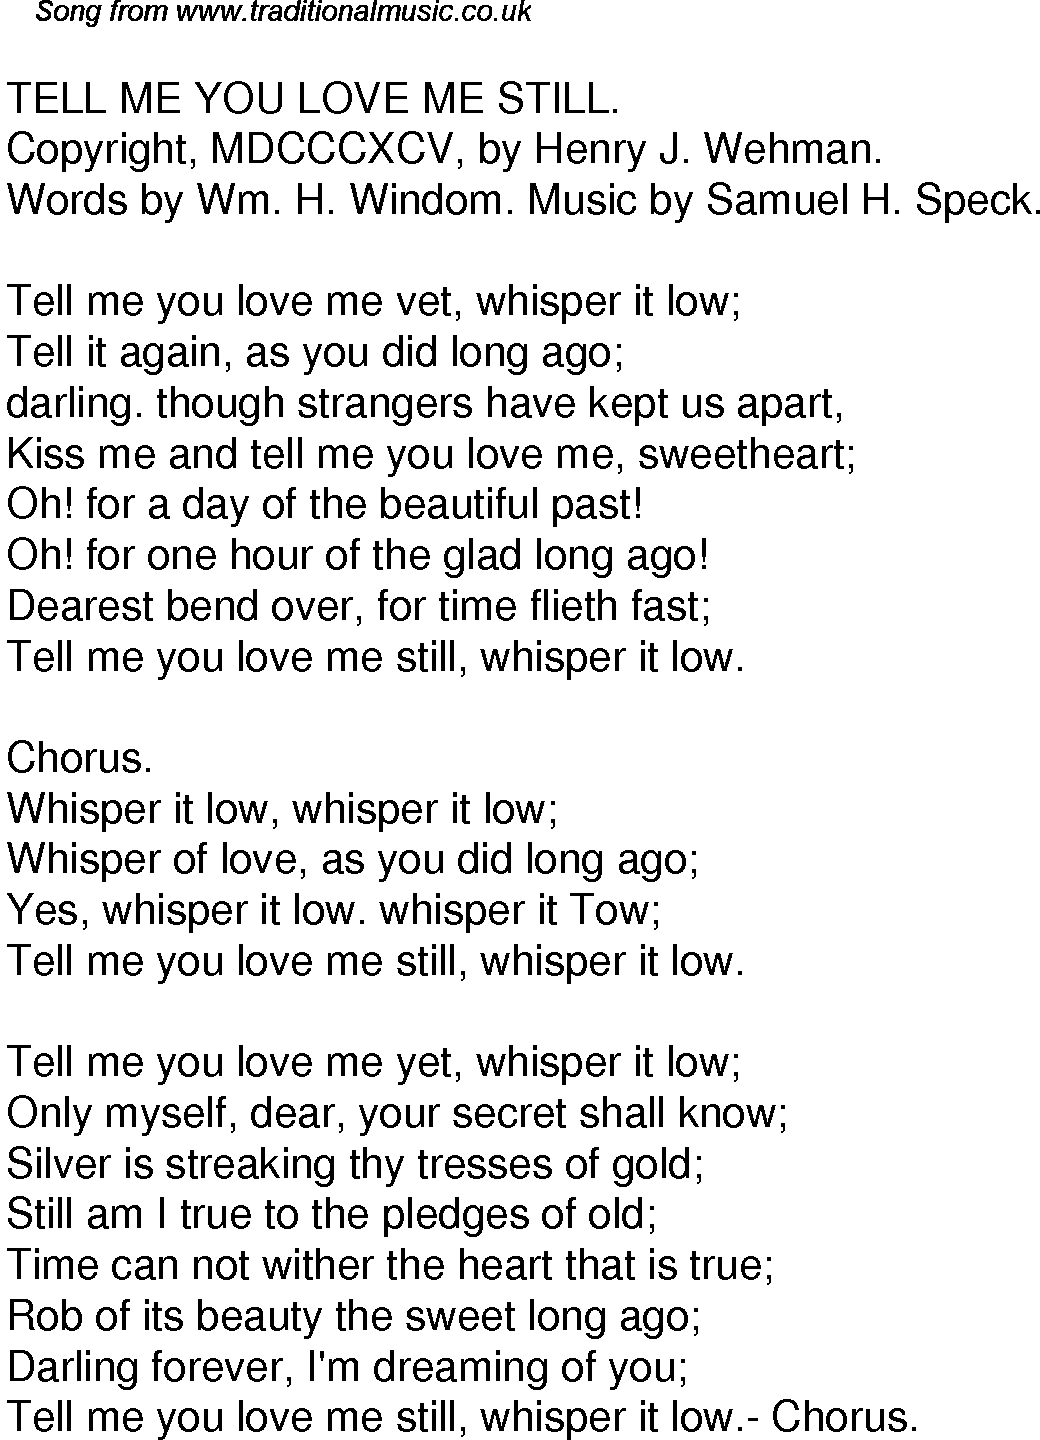 Old Time Song Lyrics For 47 Tell Me You Love Me Still